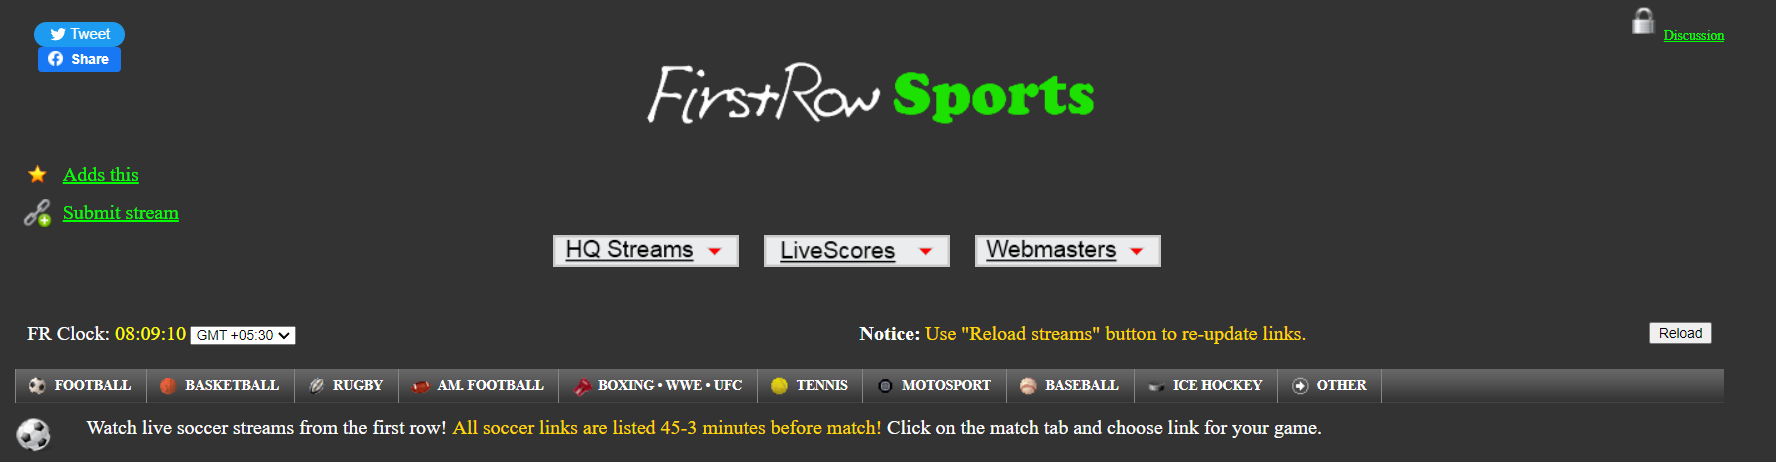 FirstRow Sports Overview